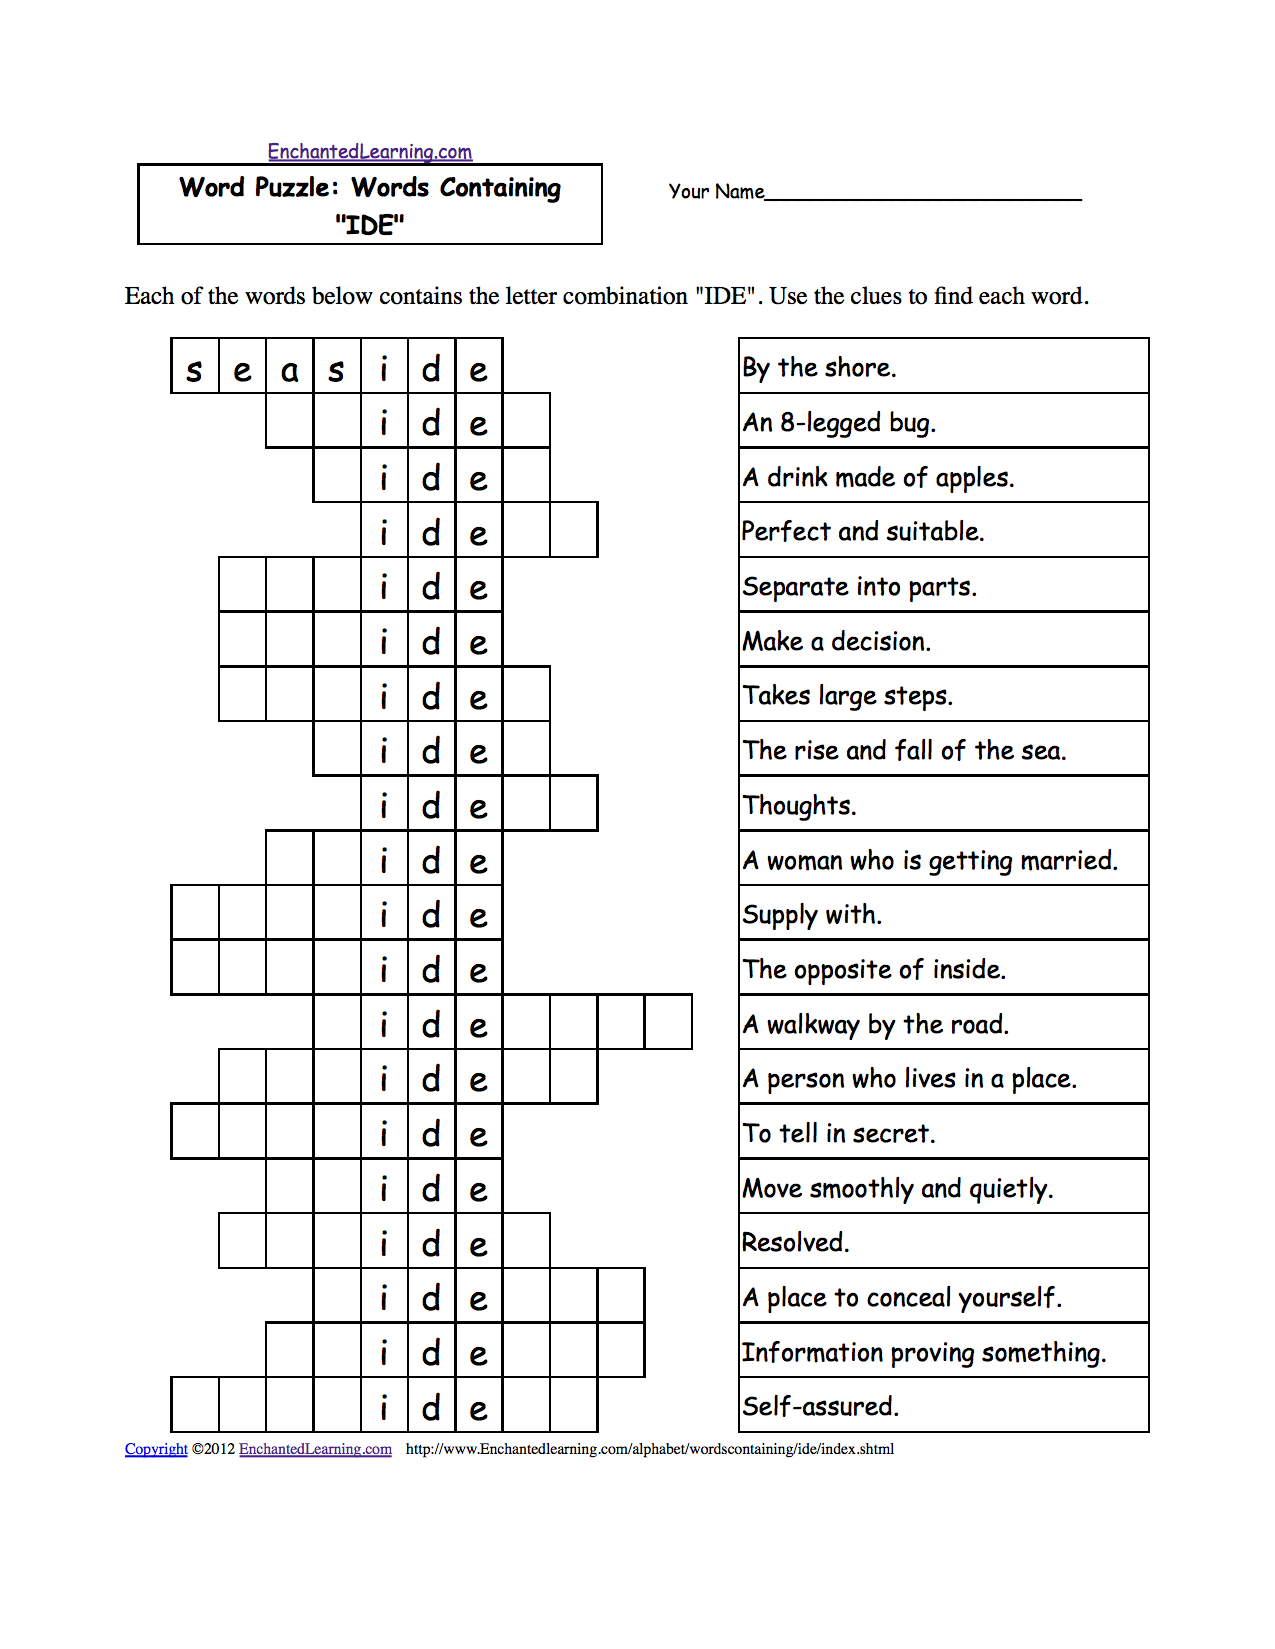 word-puzzles-words-containing-three-letter-combinations-worksheets-to